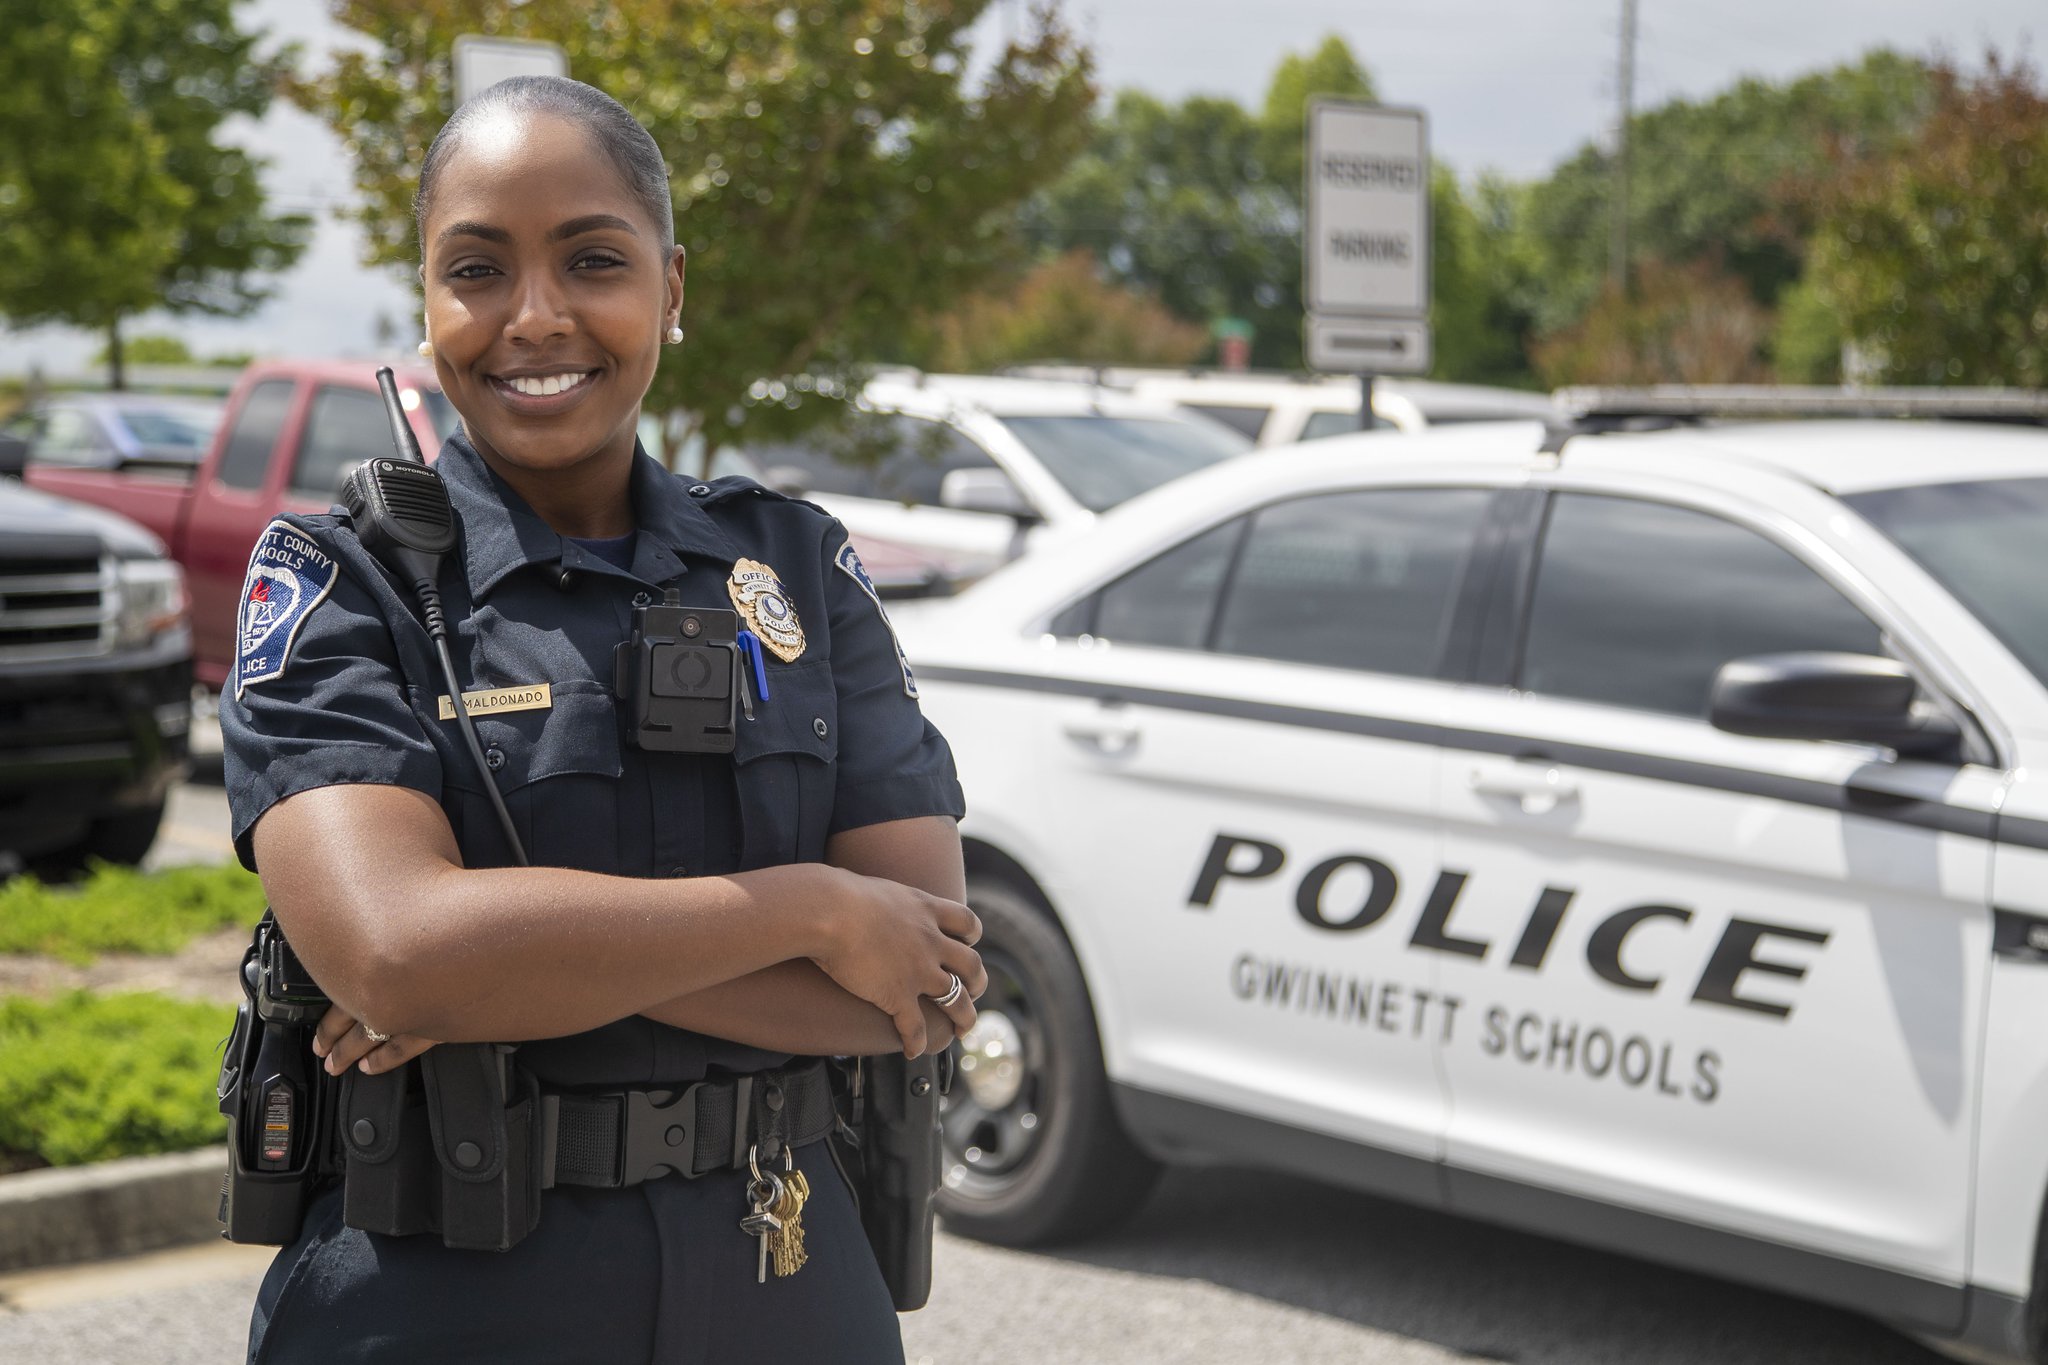 School police officer duties change with pandemic